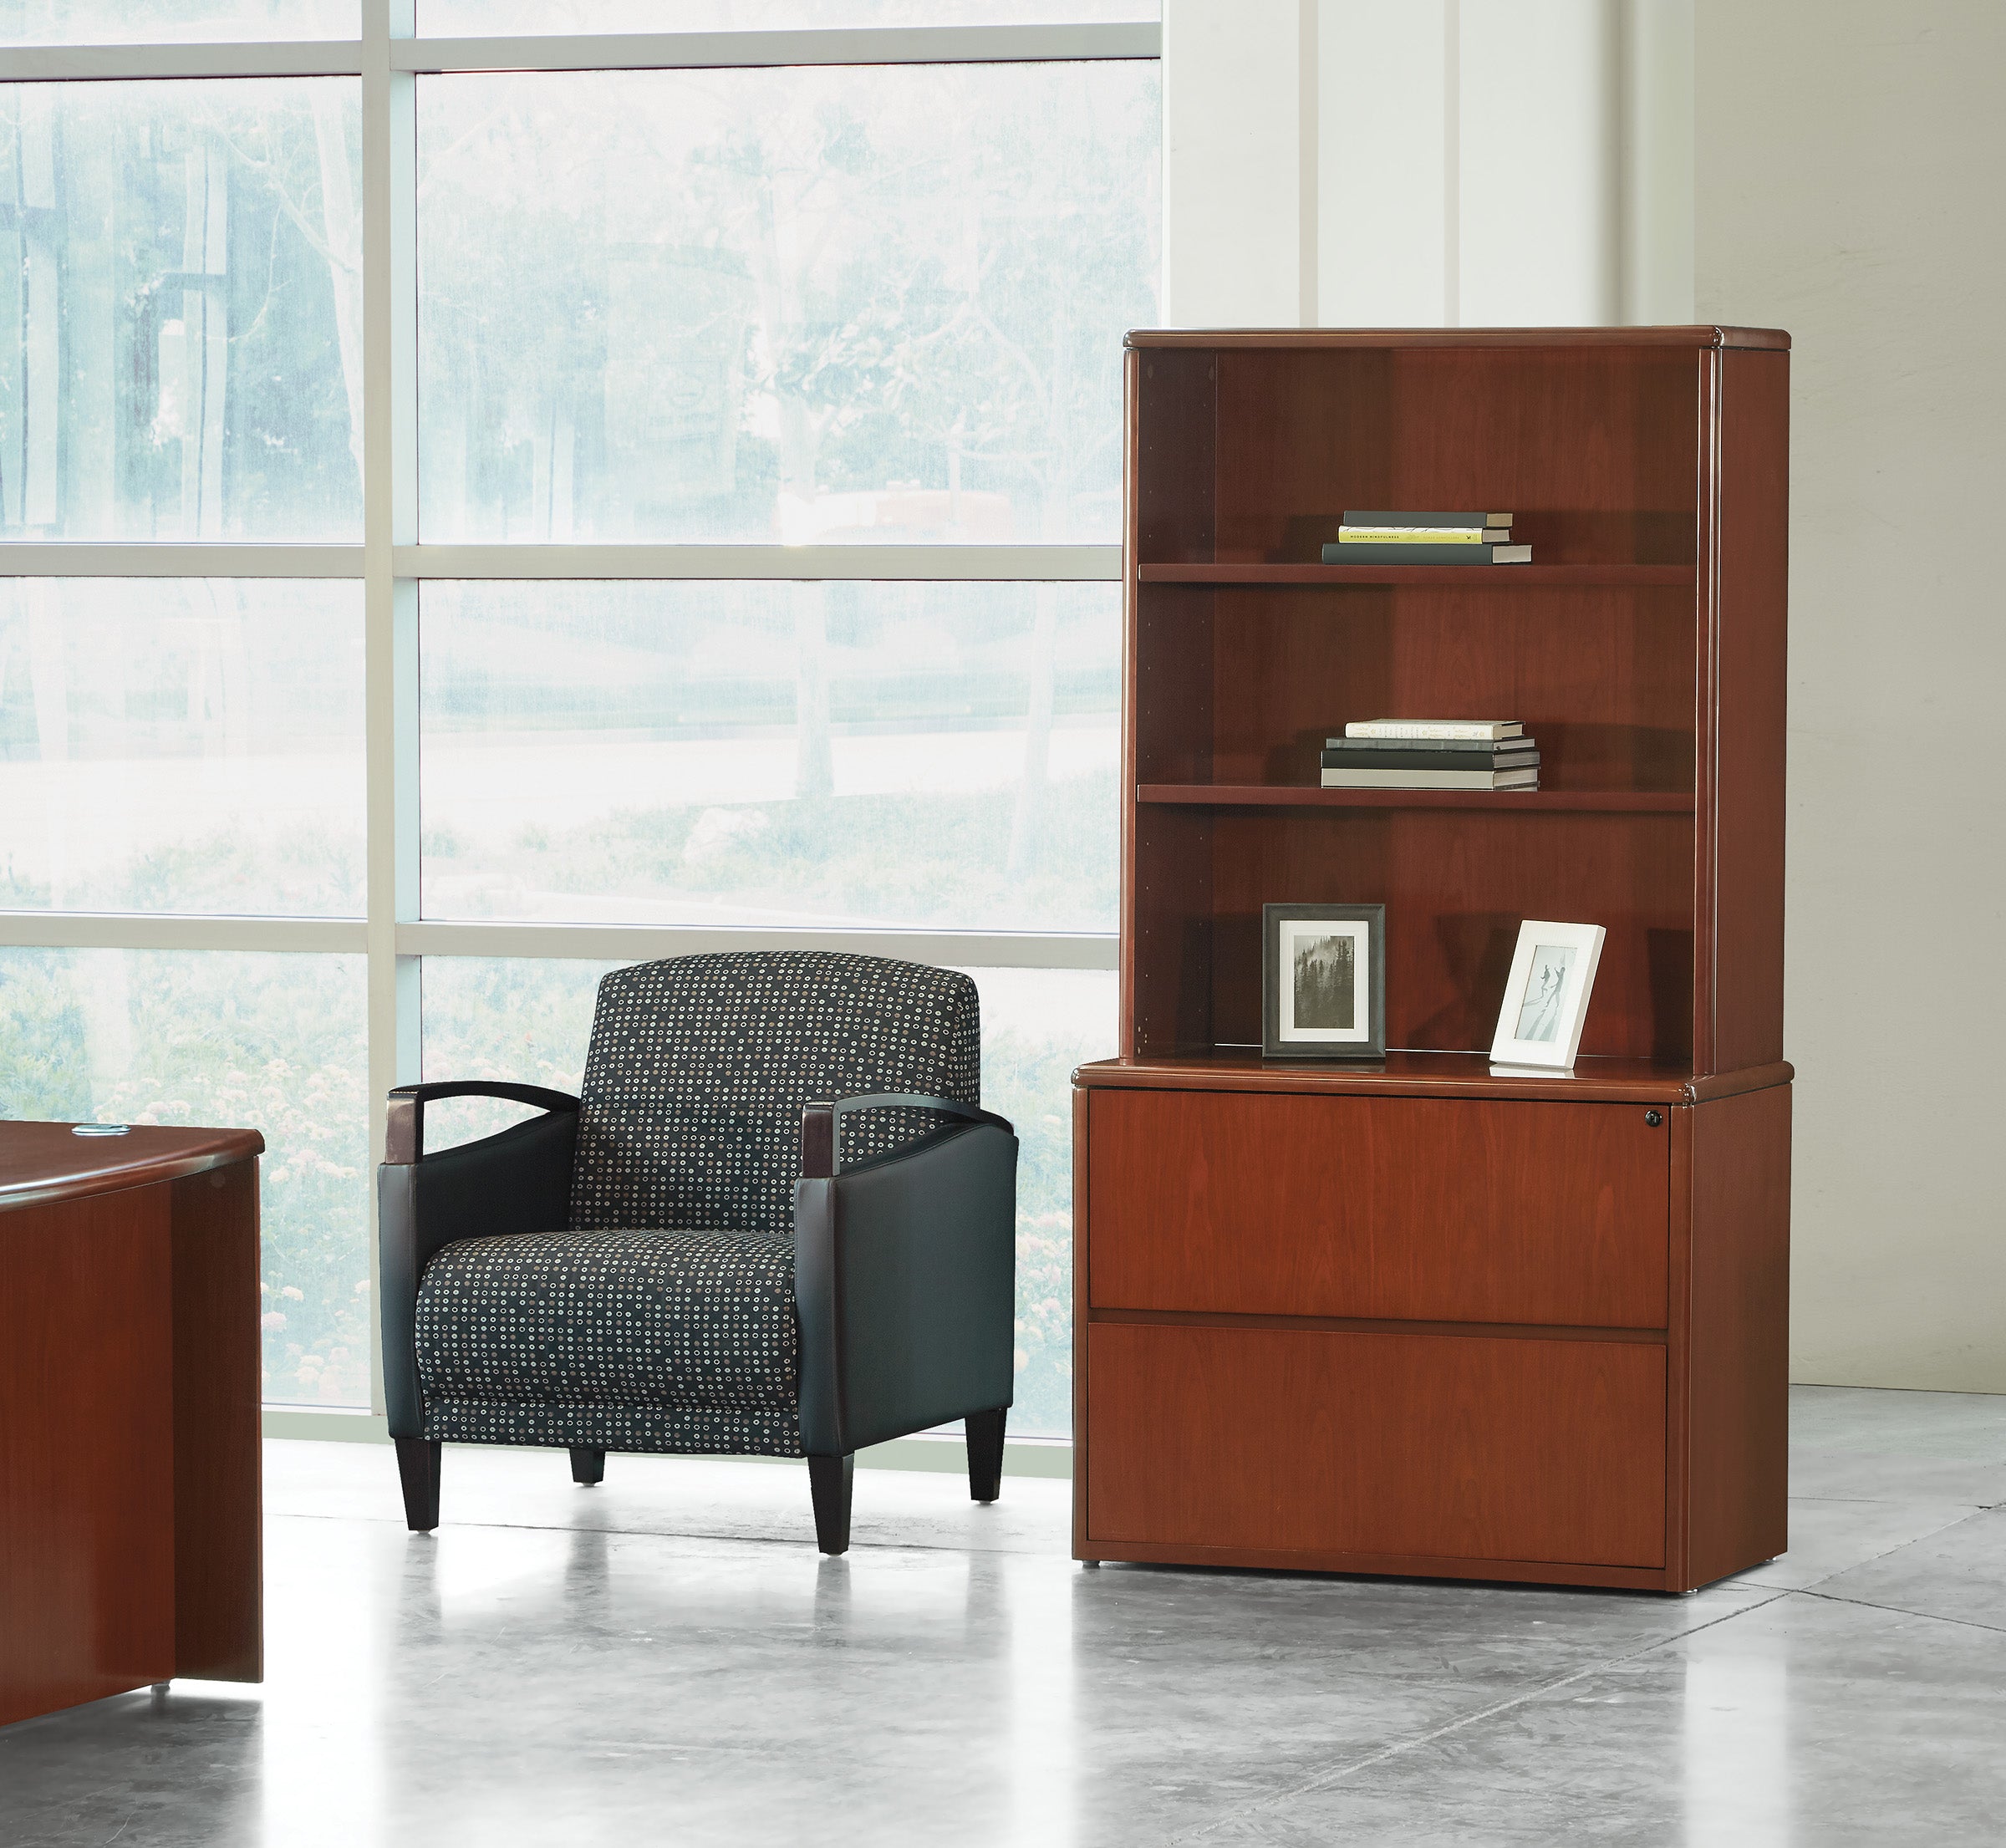 SON-12 - Sonoma 2 Drawer Lateral File Cabinet by Office Star